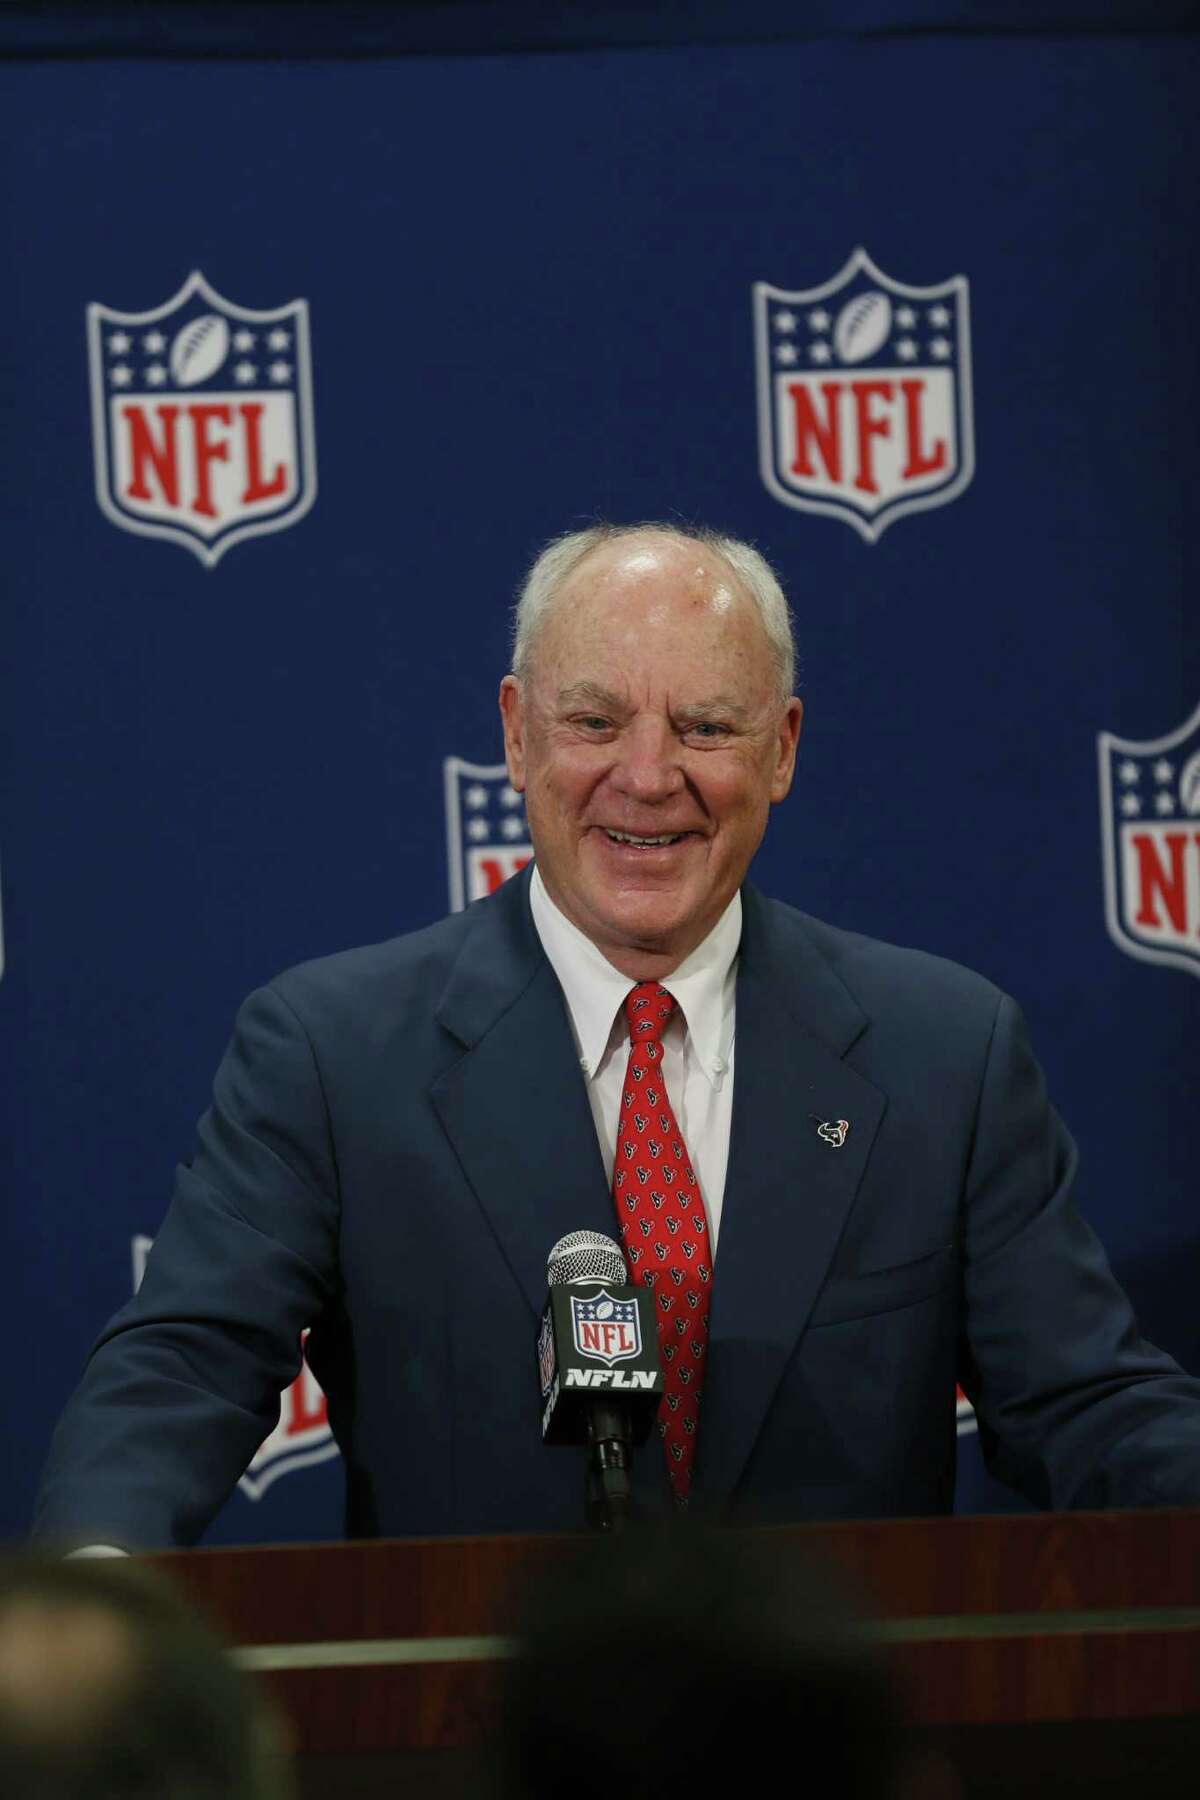 Houston Texans owner Bob McNair addresses the media after Houston was awarded the 51st Super Bowl by the NFL owners today at the NFL League Meetings in Boston.